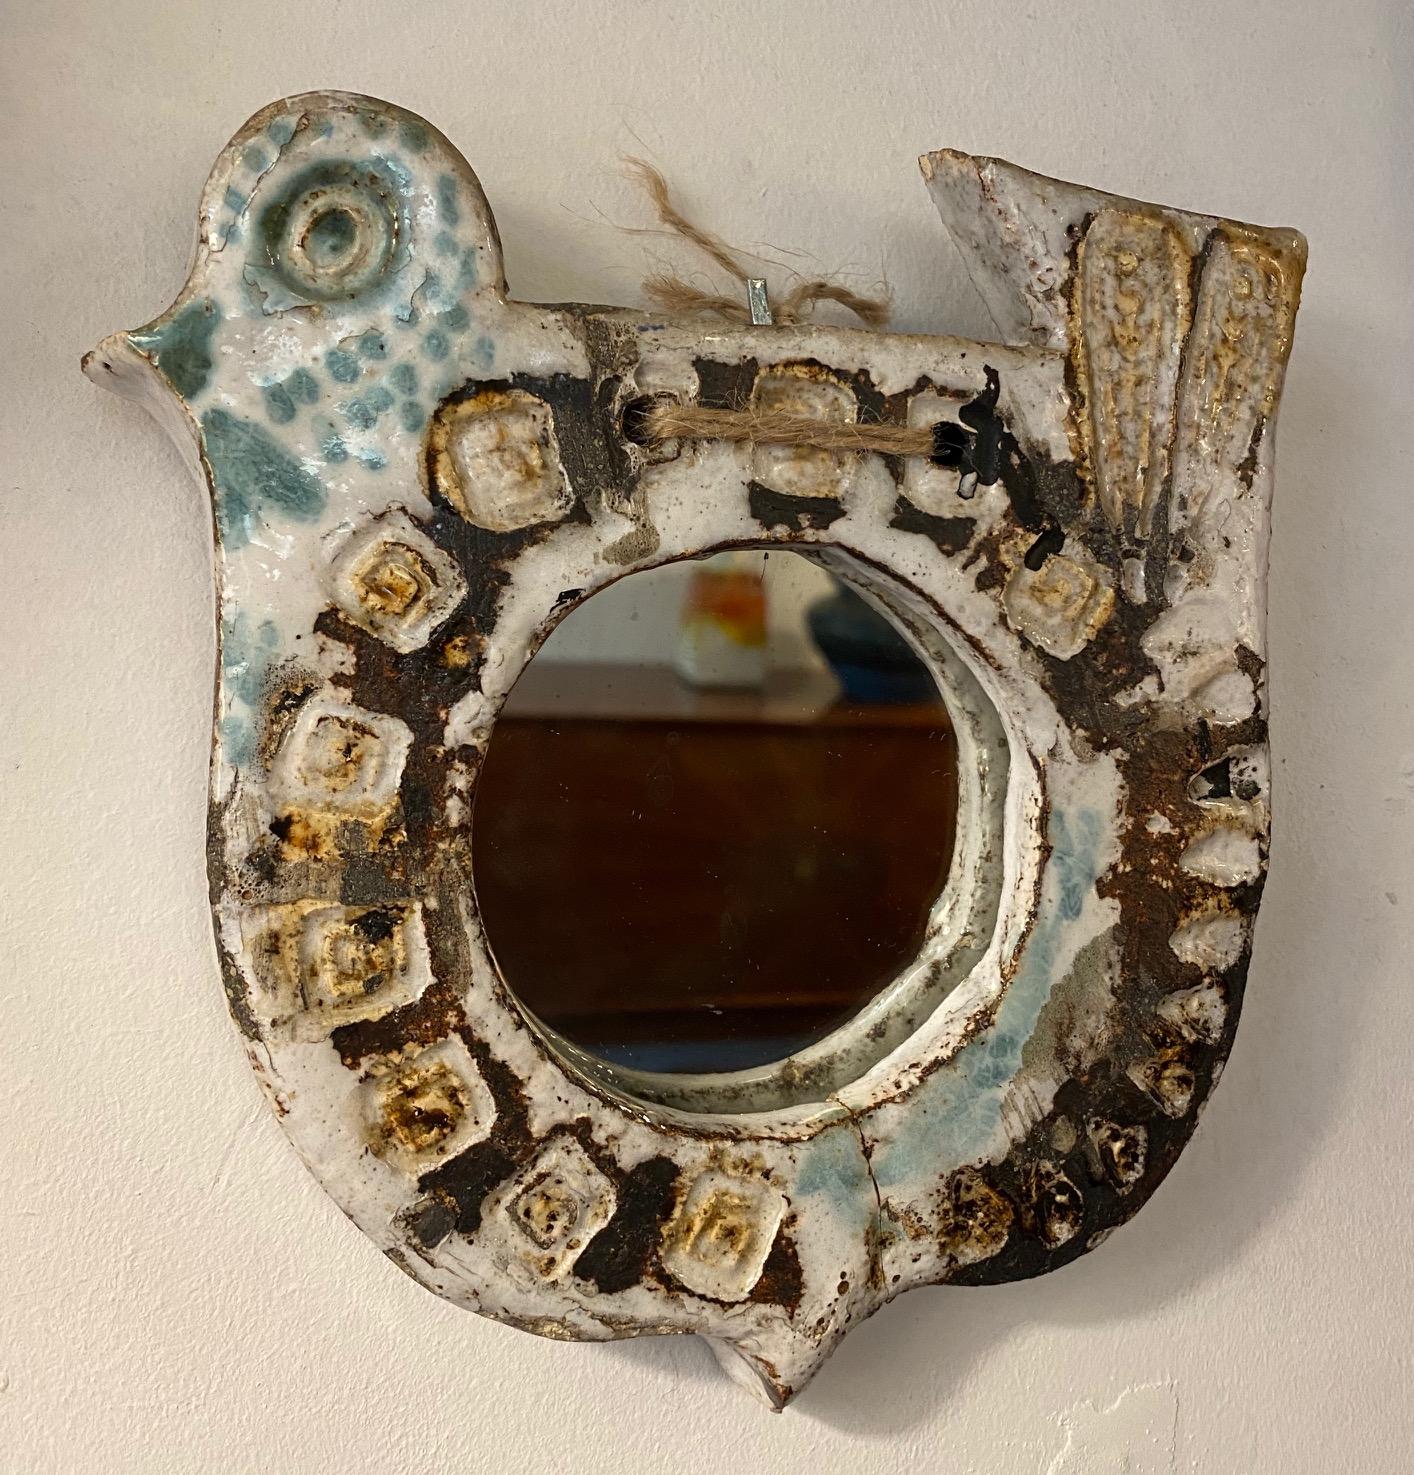 Ceramic mirror, France, Vallauris, 1960s
Attributed to Les Argonautes (Frédérique Bourguet and Isabelle Ferlay), French workshop created in Vallauris, south of France, in 1953 and active until the death of Federique Bourguet in 1997.